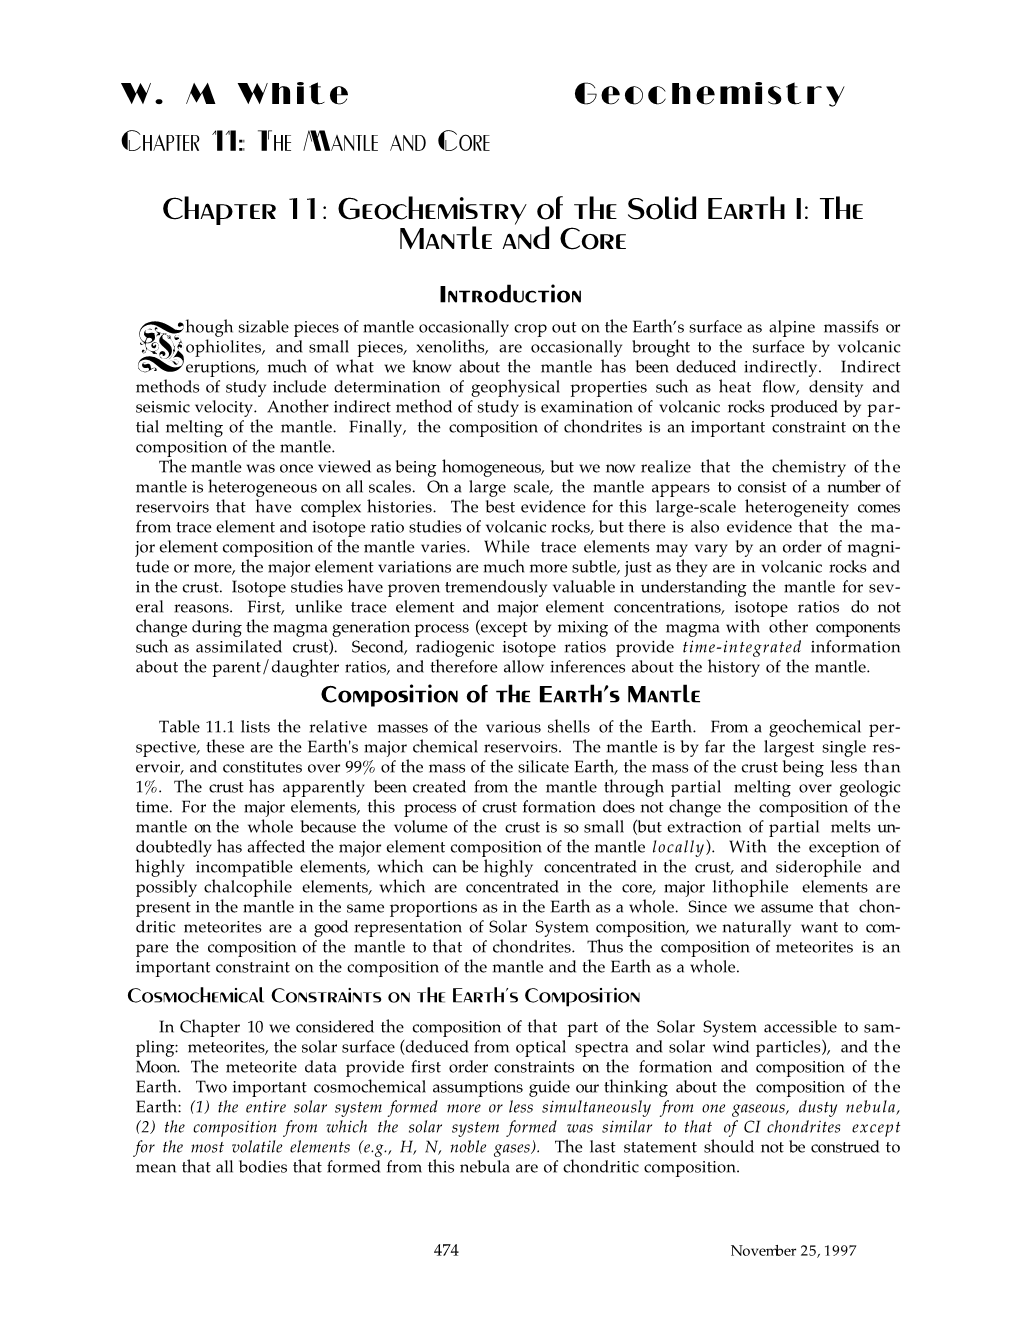 The Mantle and Core Chapter 11: Geochemistry of the Solid Earth I